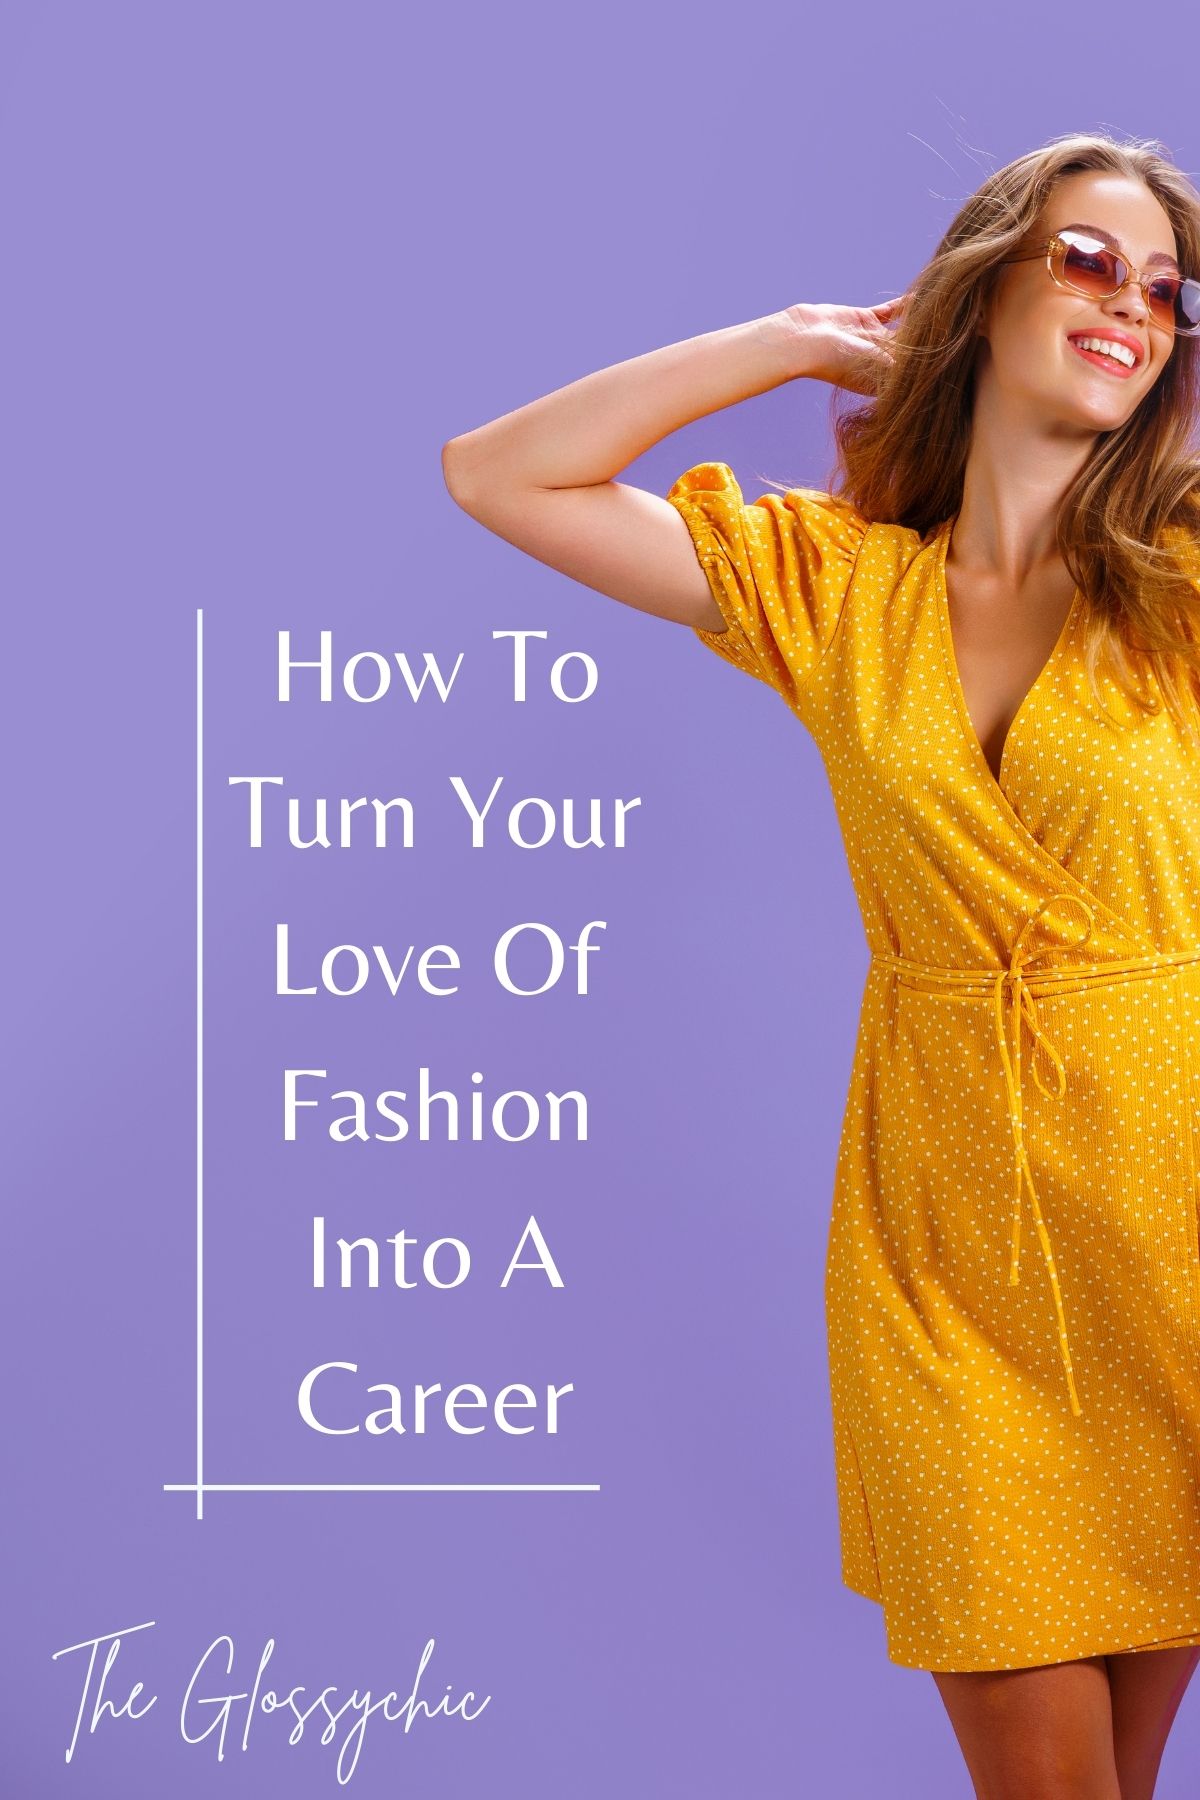 How To Turn Your Love Of Fashion Into A Career